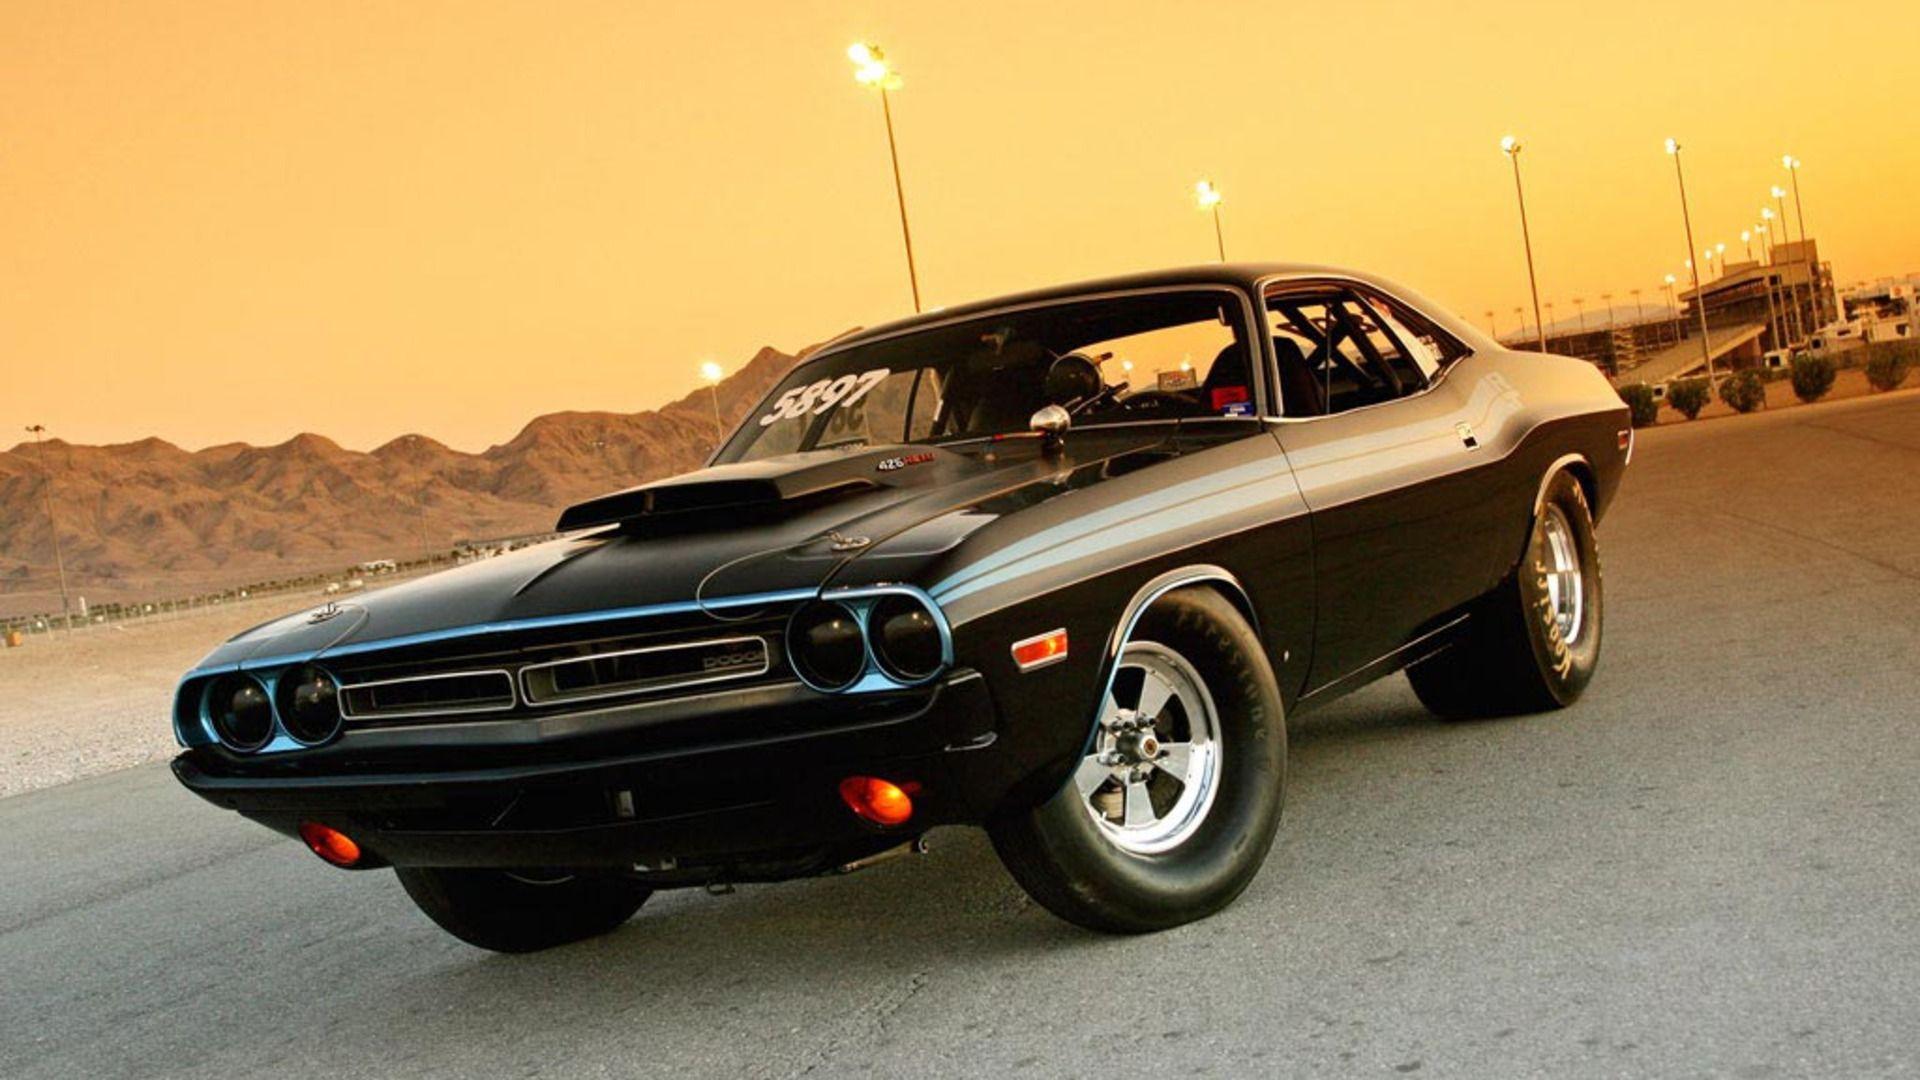 Fast and Furious Cars HD Wallpaper. HDWallpaperFit. Classic cars muscle, Old muscle cars, Sports cars luxury